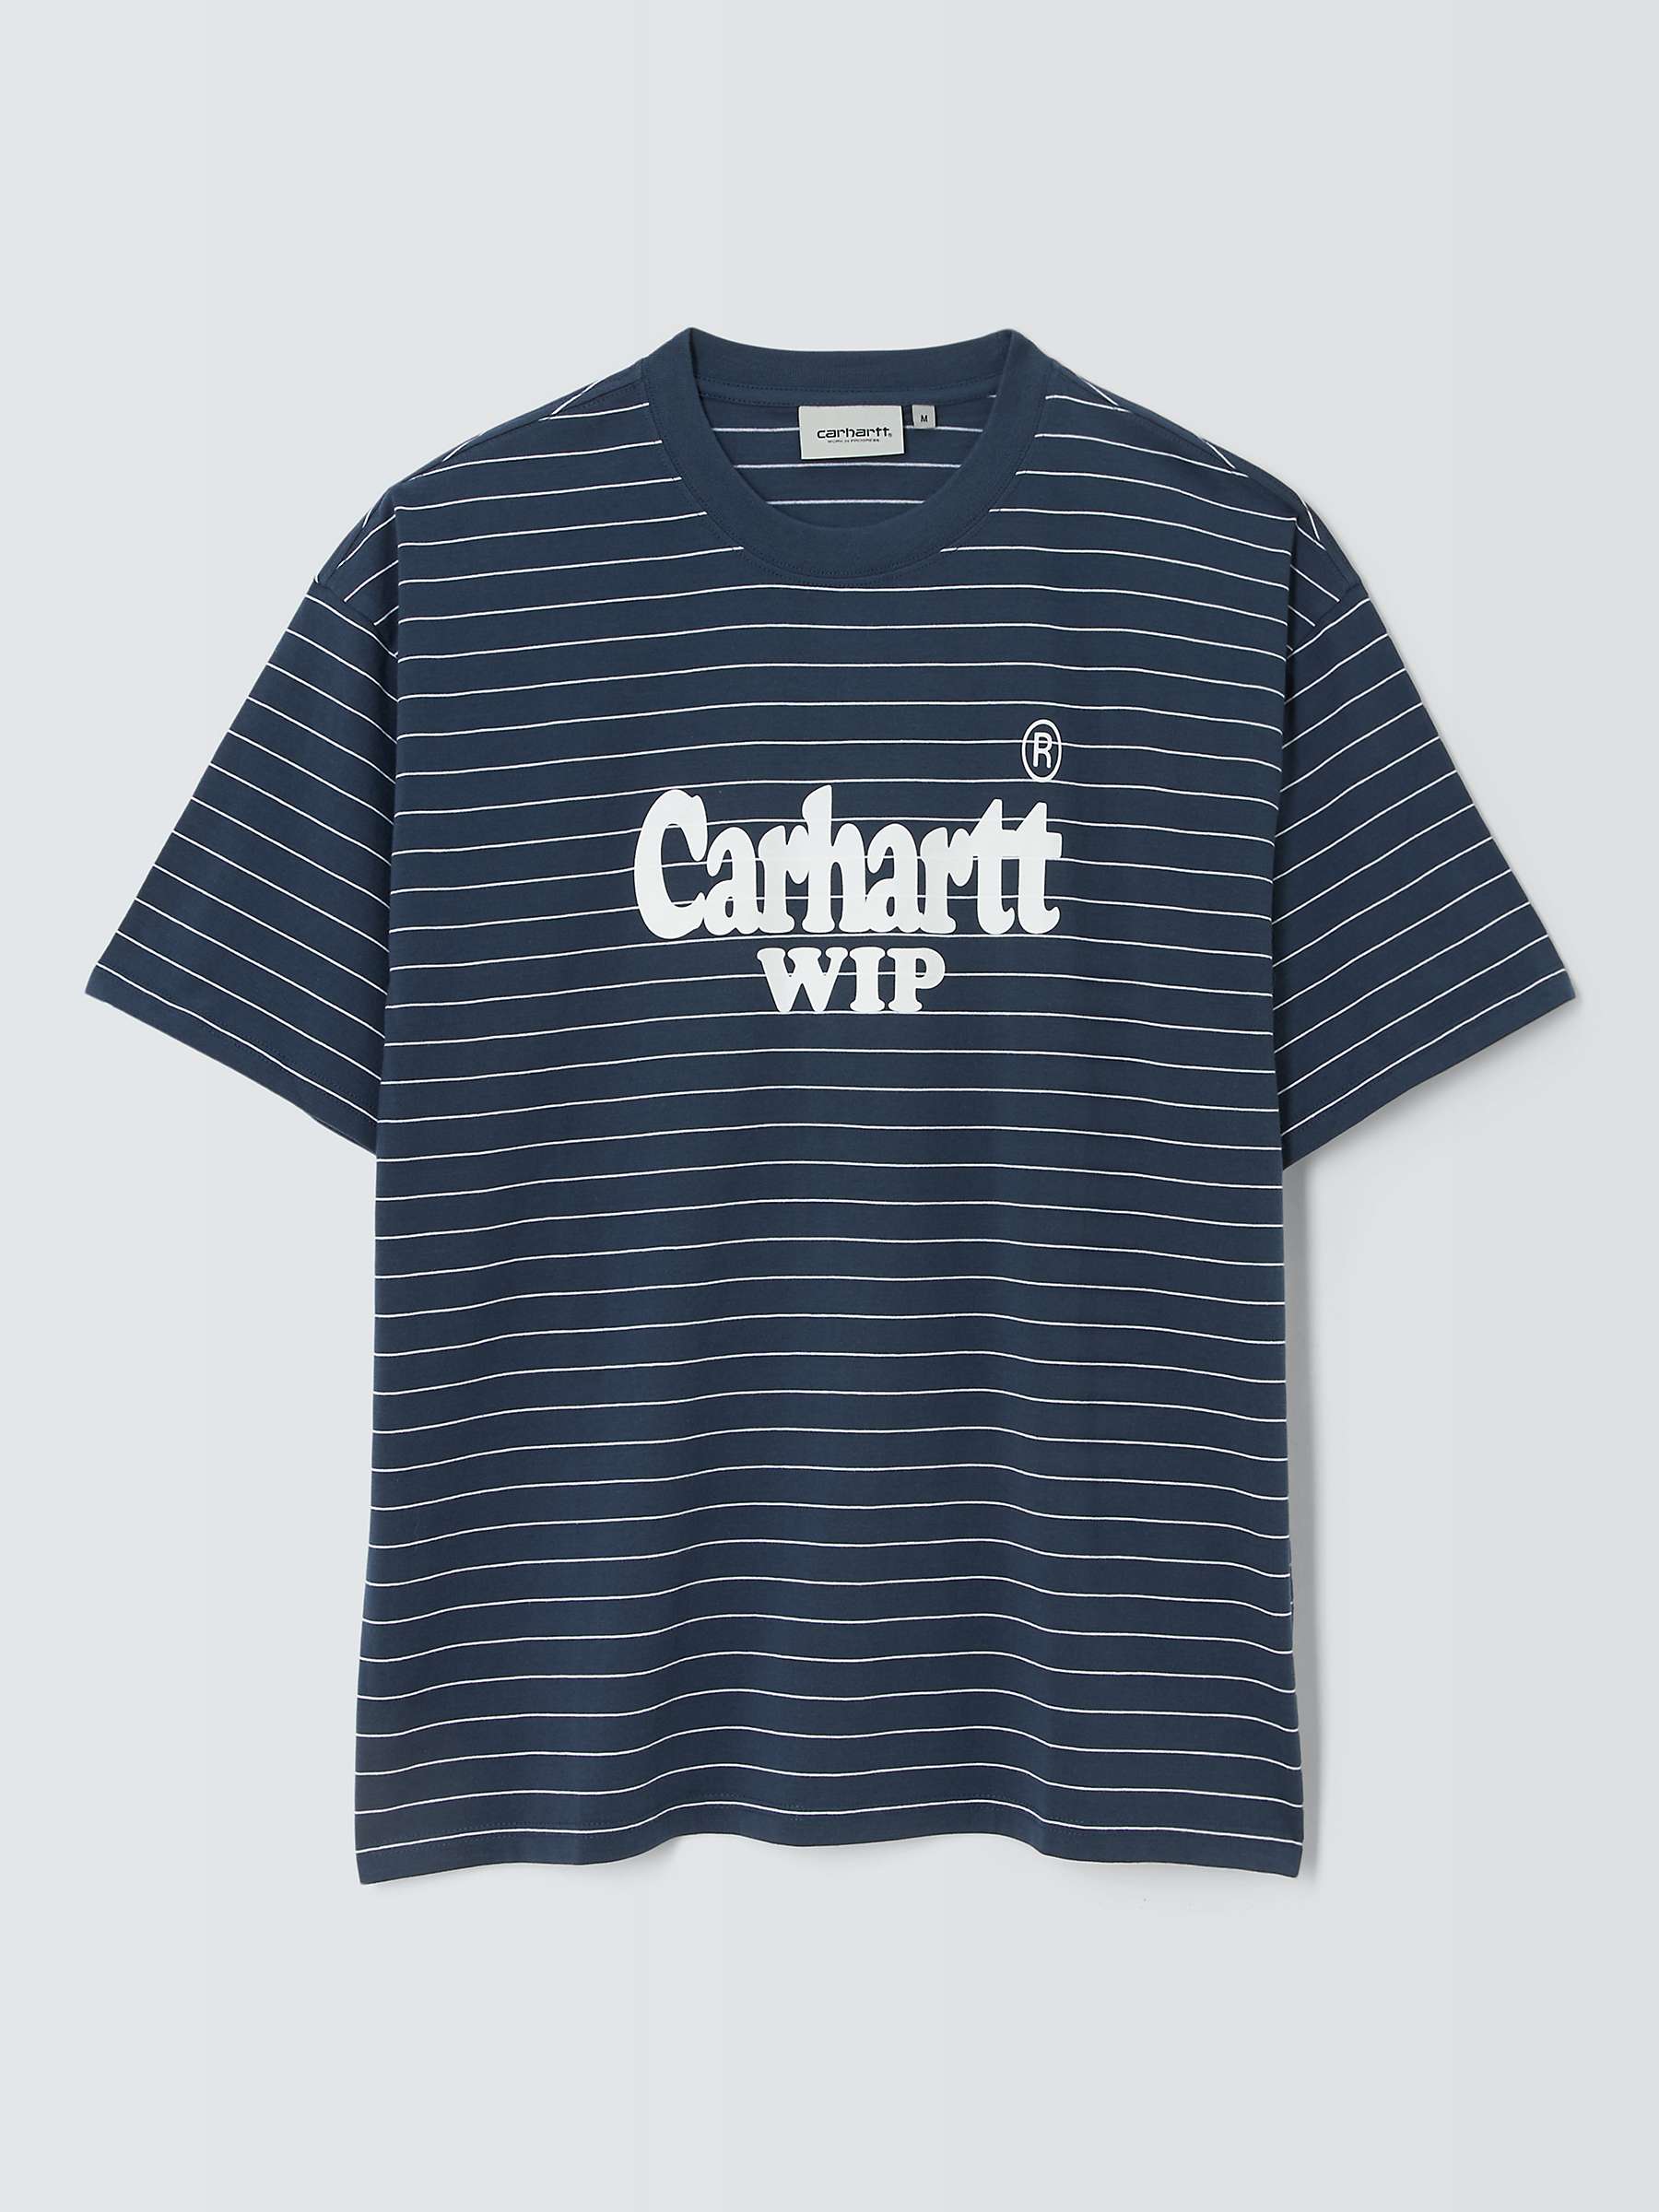 Buy Carhartt WIP Striped Cotton T-Shirt, Blue/White Online at johnlewis.com